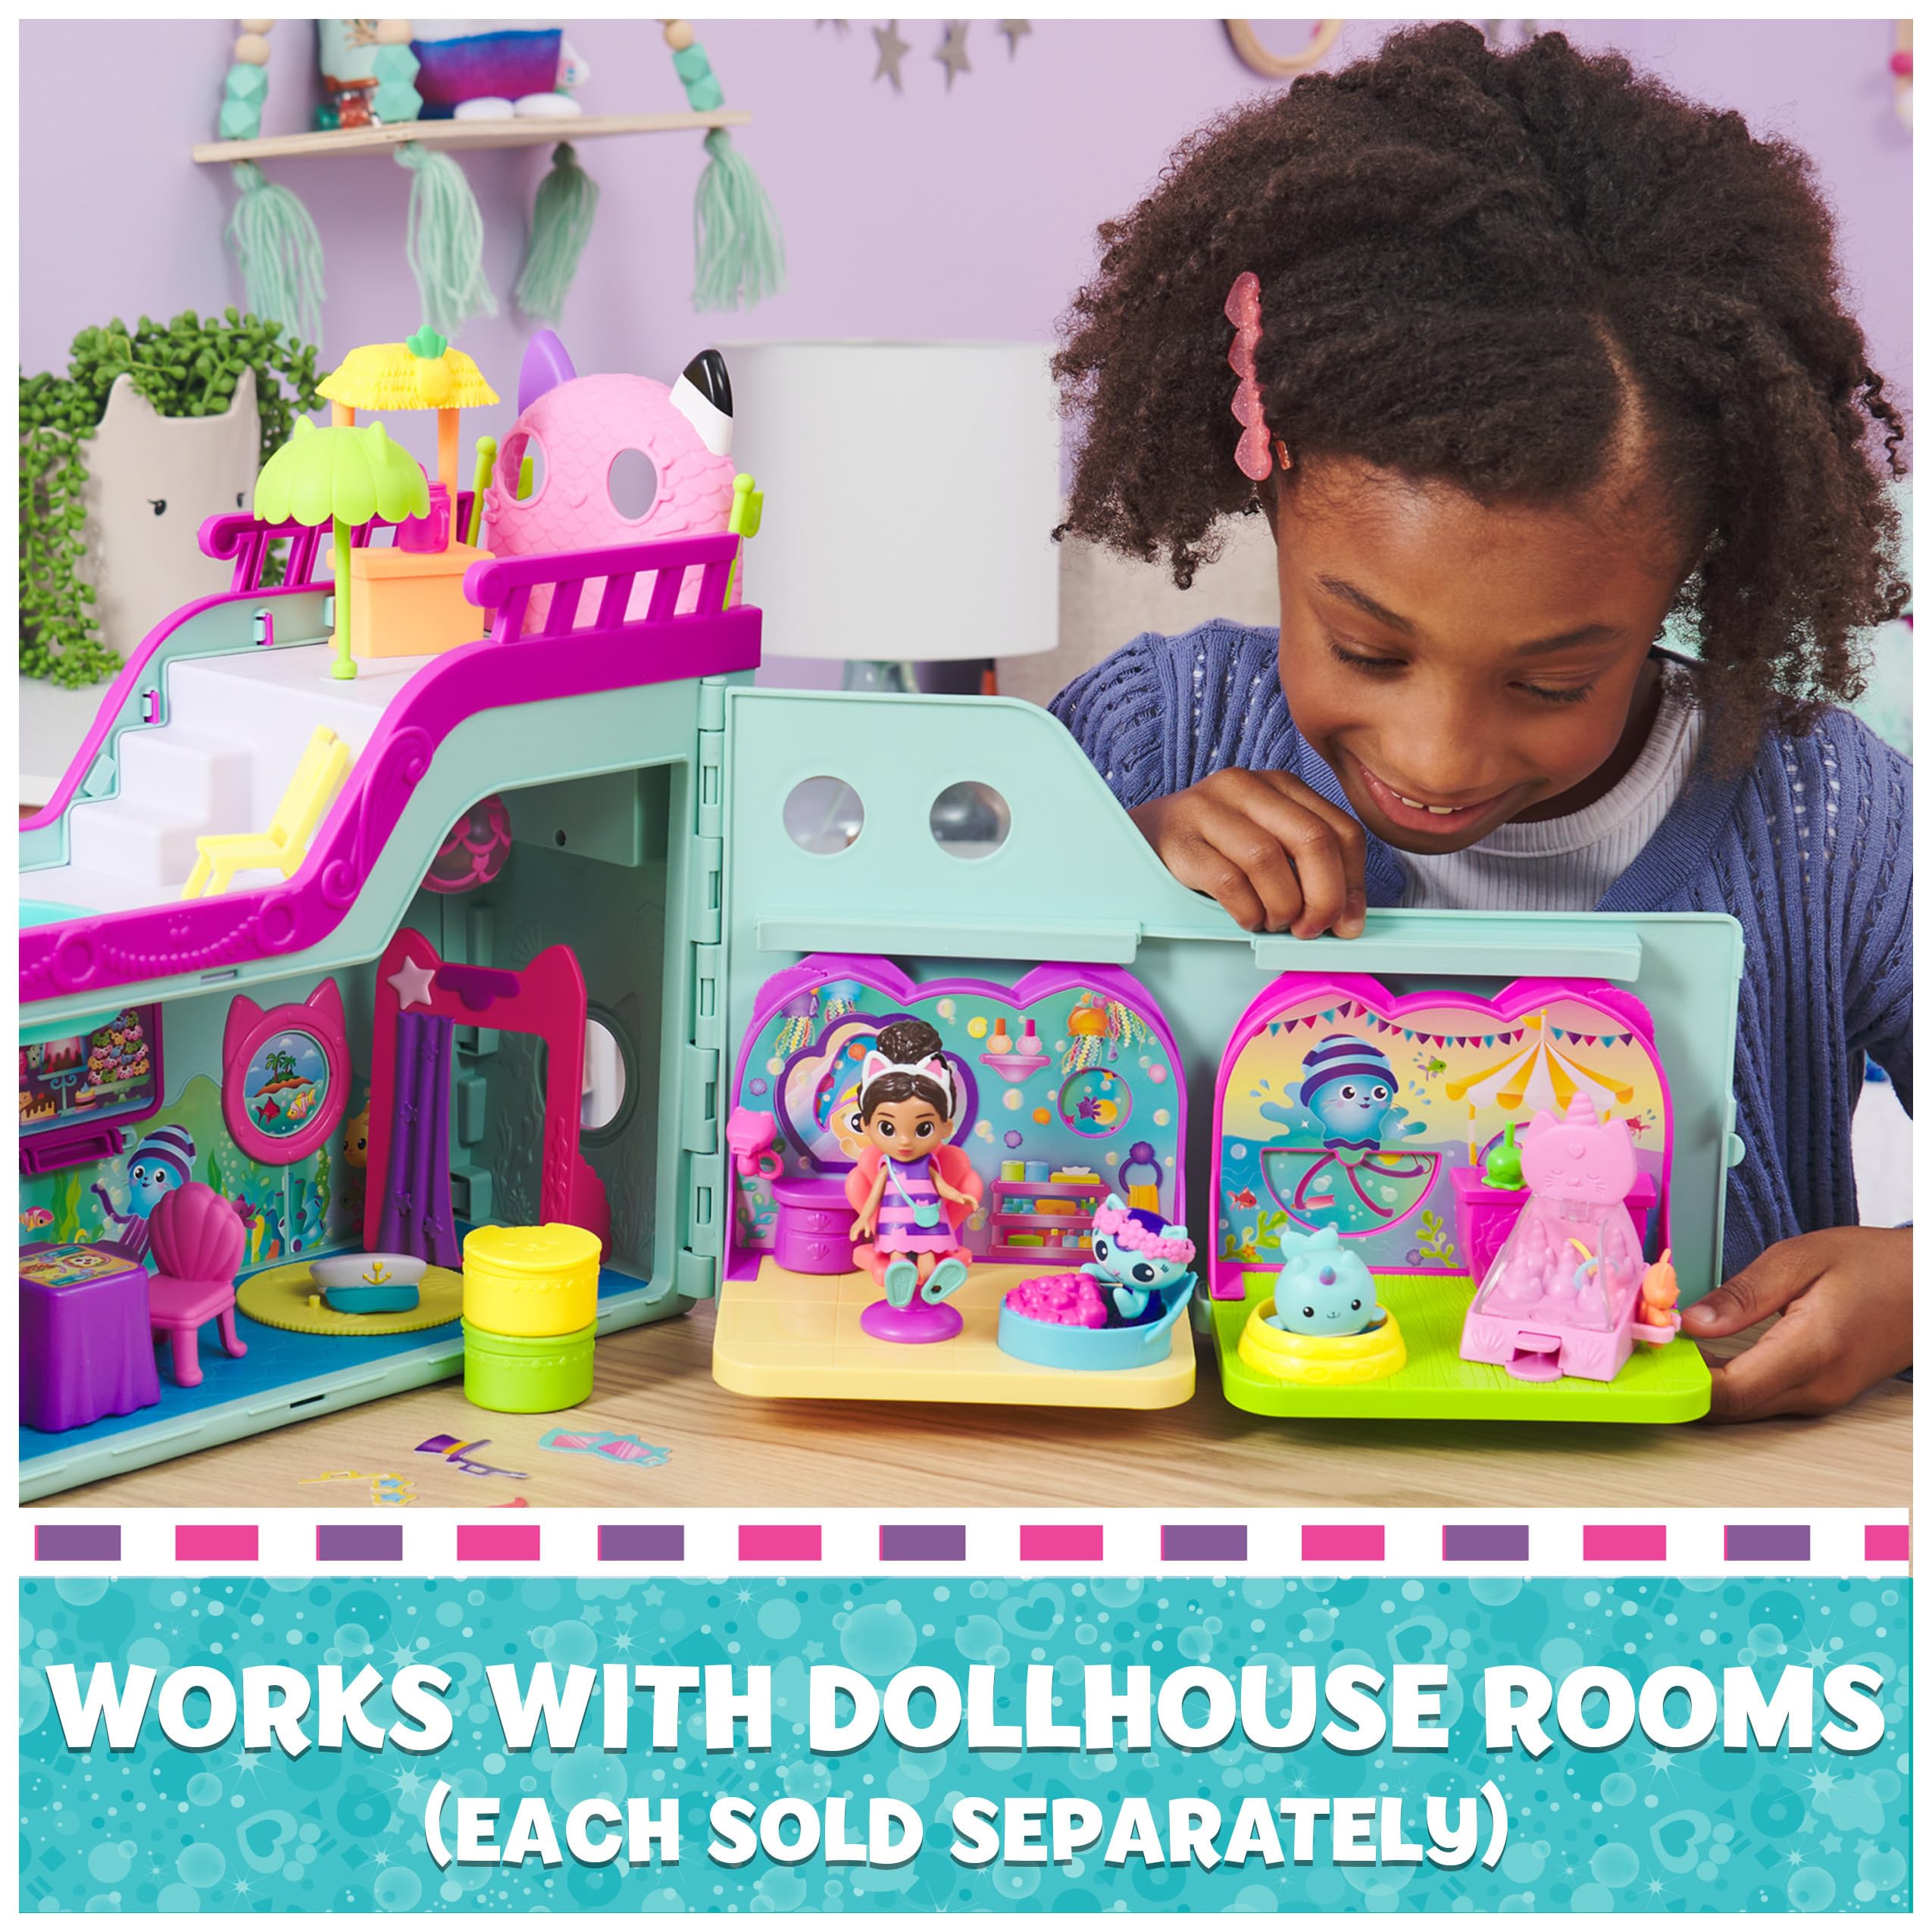 Gabby's Dollhouse, Gabby Cat Friend Ship, Cruise Ship Toy with 2 Toy Figures, Surprise Toys & Dollhouse Accessories, Kids Toys for Girls & Boys 3+